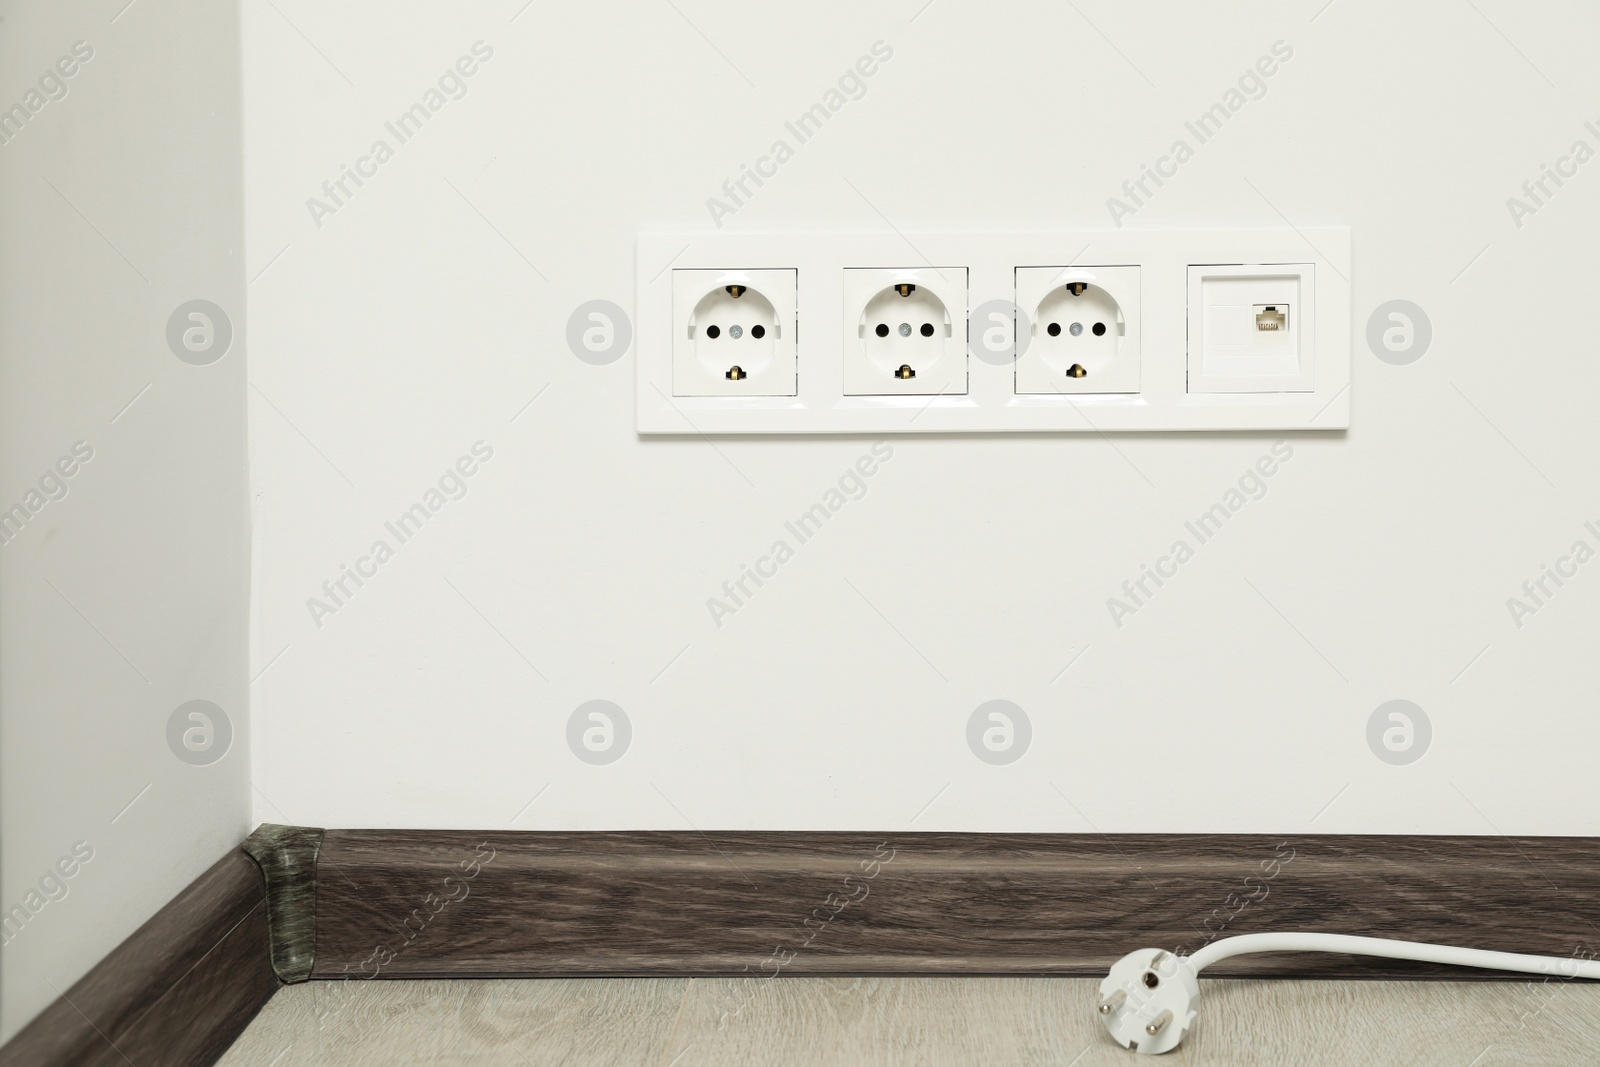 Photo of Plug near white wall with power sockets indoors. Electrical supply